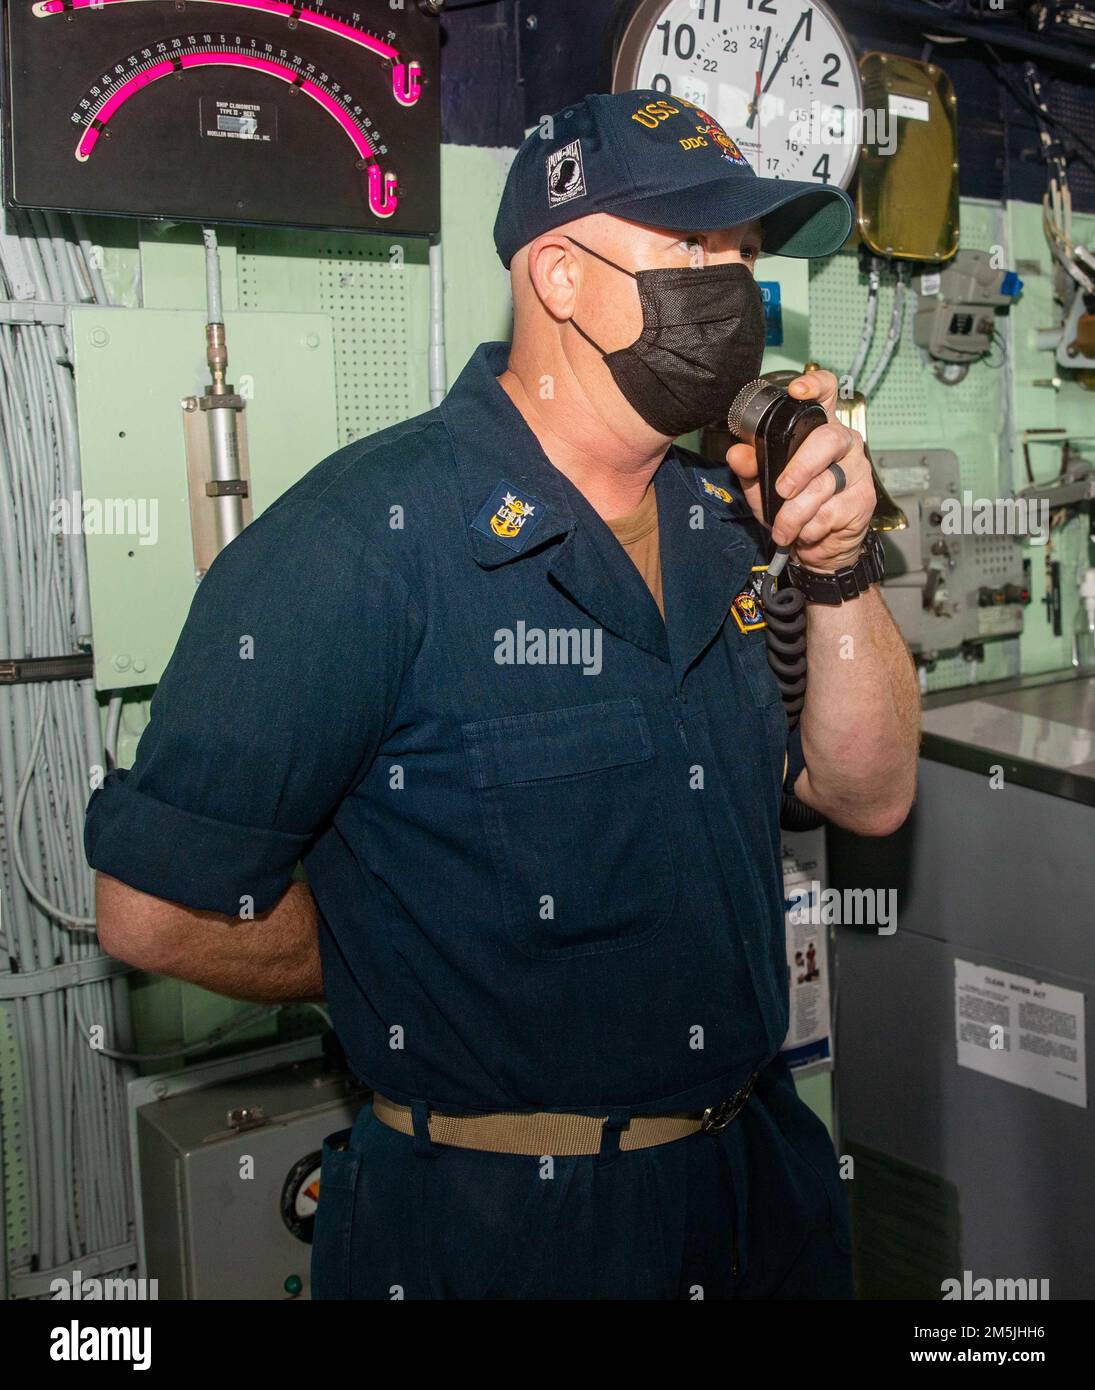 220319-N-KW492-1014 PHILIPPINE SEA (March 19, 2022) Command Master Chief Troy Bojorquiz, from Yucaipa, California makes an announcement to the crew on the ship’s intercom in the bridge of the Arleigh Burke-class guided-missile destroyer USS Milius (DDG 69). Milius is assigned to Destroyer Squadron (DESRON) 15, Navy’s largest forward-deployed DESRON and the U.S. 7th Fleet’s principal fighting force, and is underway supporting a free and open Indo-Pacific. Stock Photo